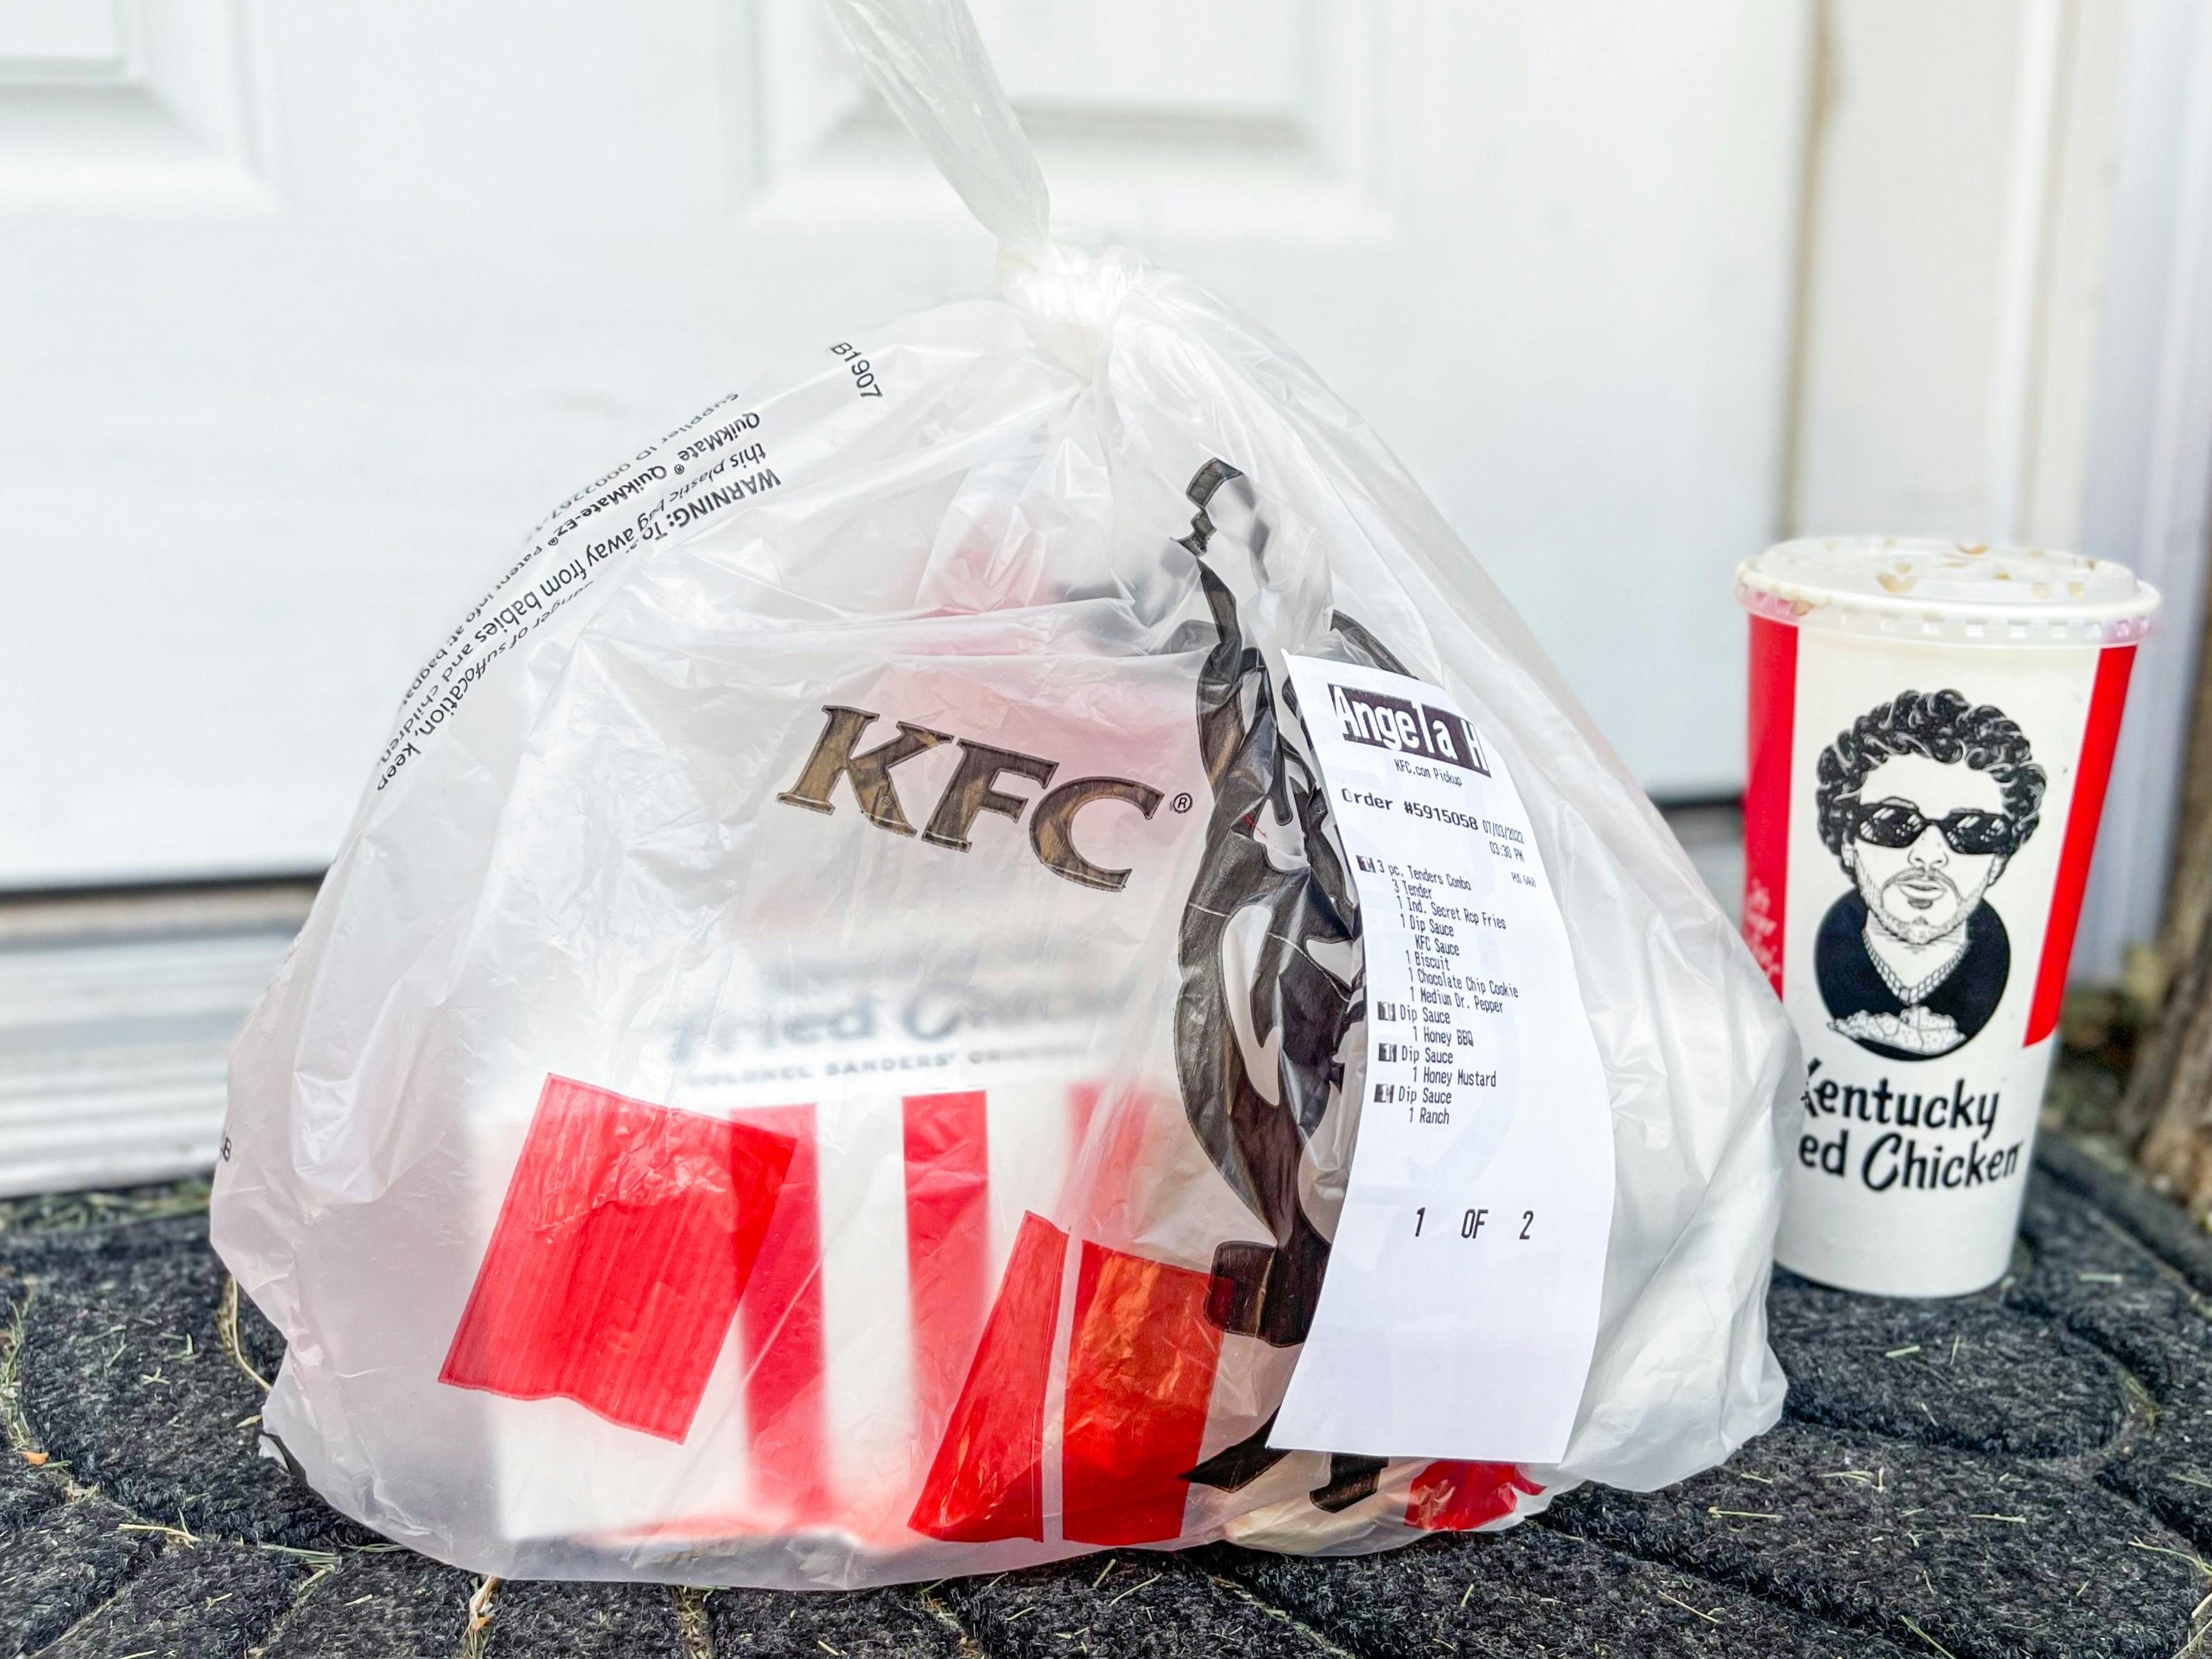 A bag of KFC takeout sitting on a front porch next to a drink.